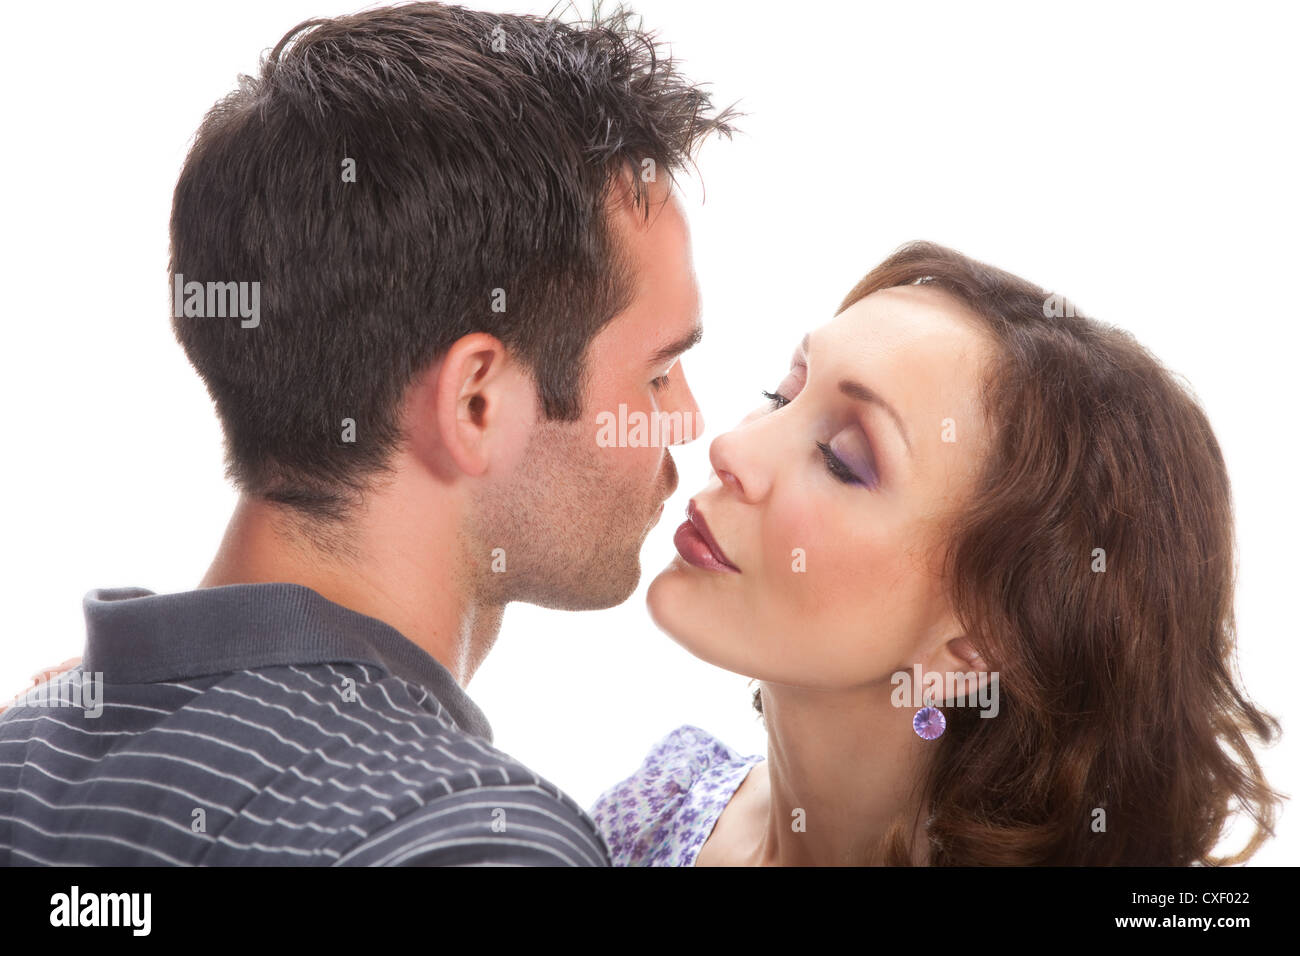 young couple in love, close up Stock Photo